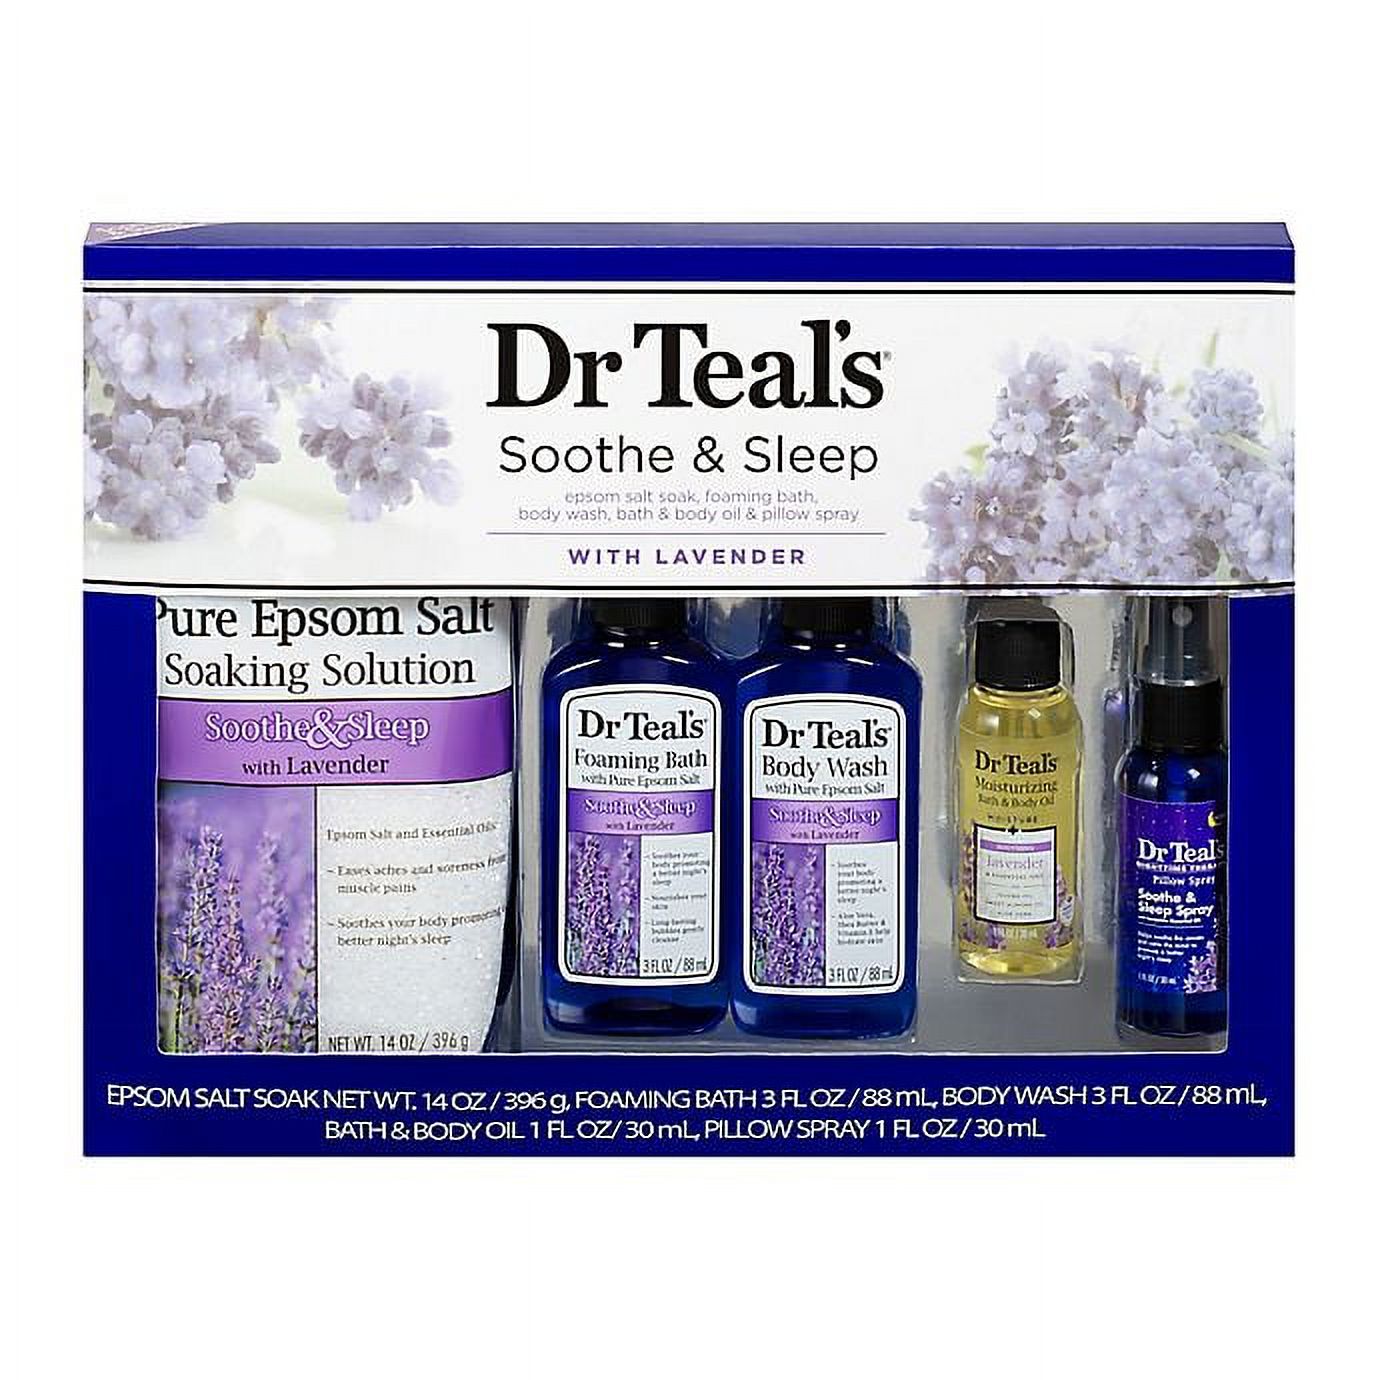 Dr. Teal's Sooth & Sleep 5-Piece Gift Set in Lavender,Great for easing muscle aches and softening dry skin - image 1 of 1